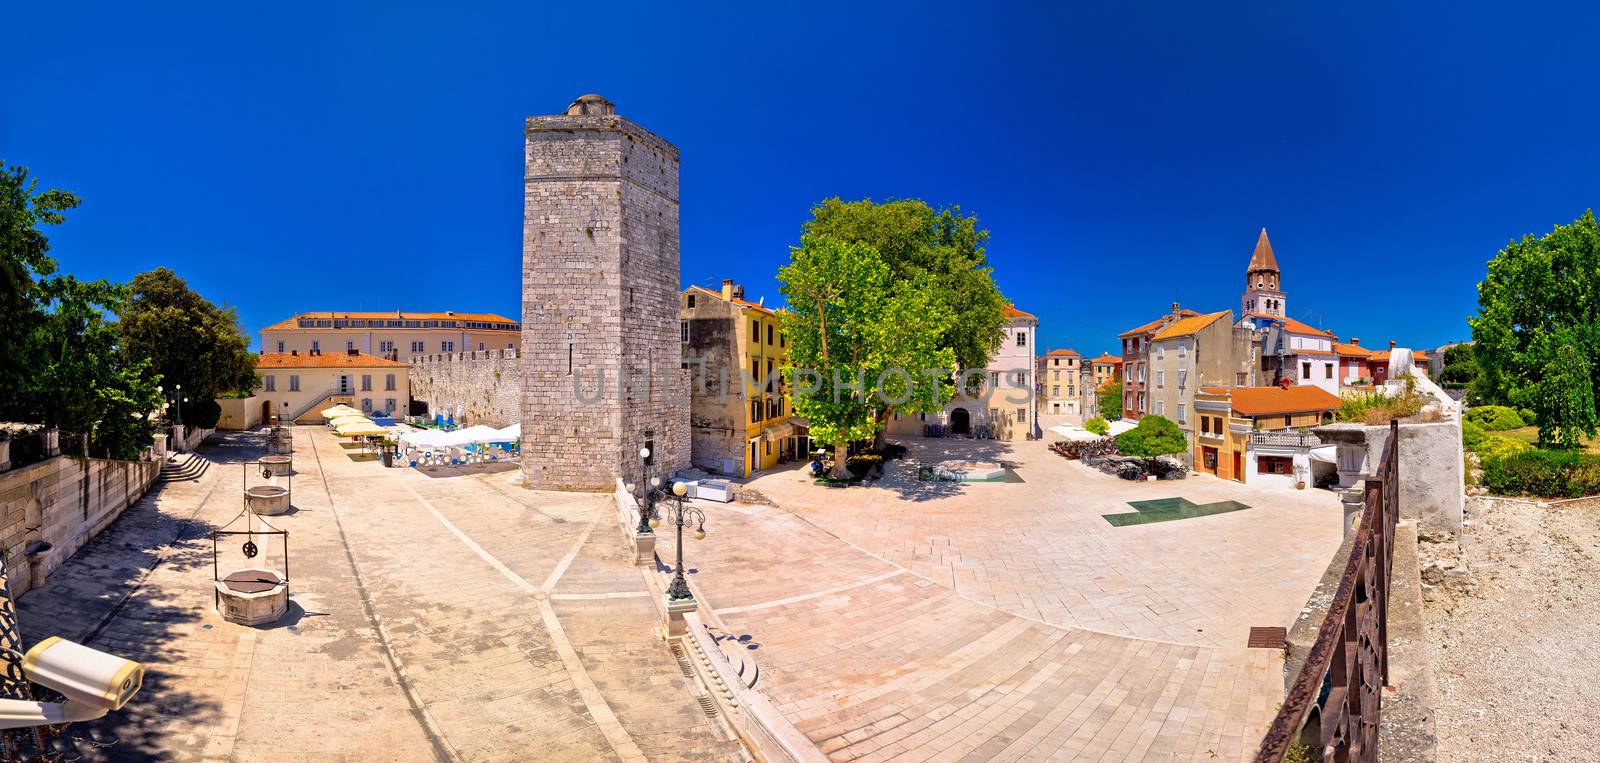 Zadar Five wells square and historic architecture panoramic view by xbrchx